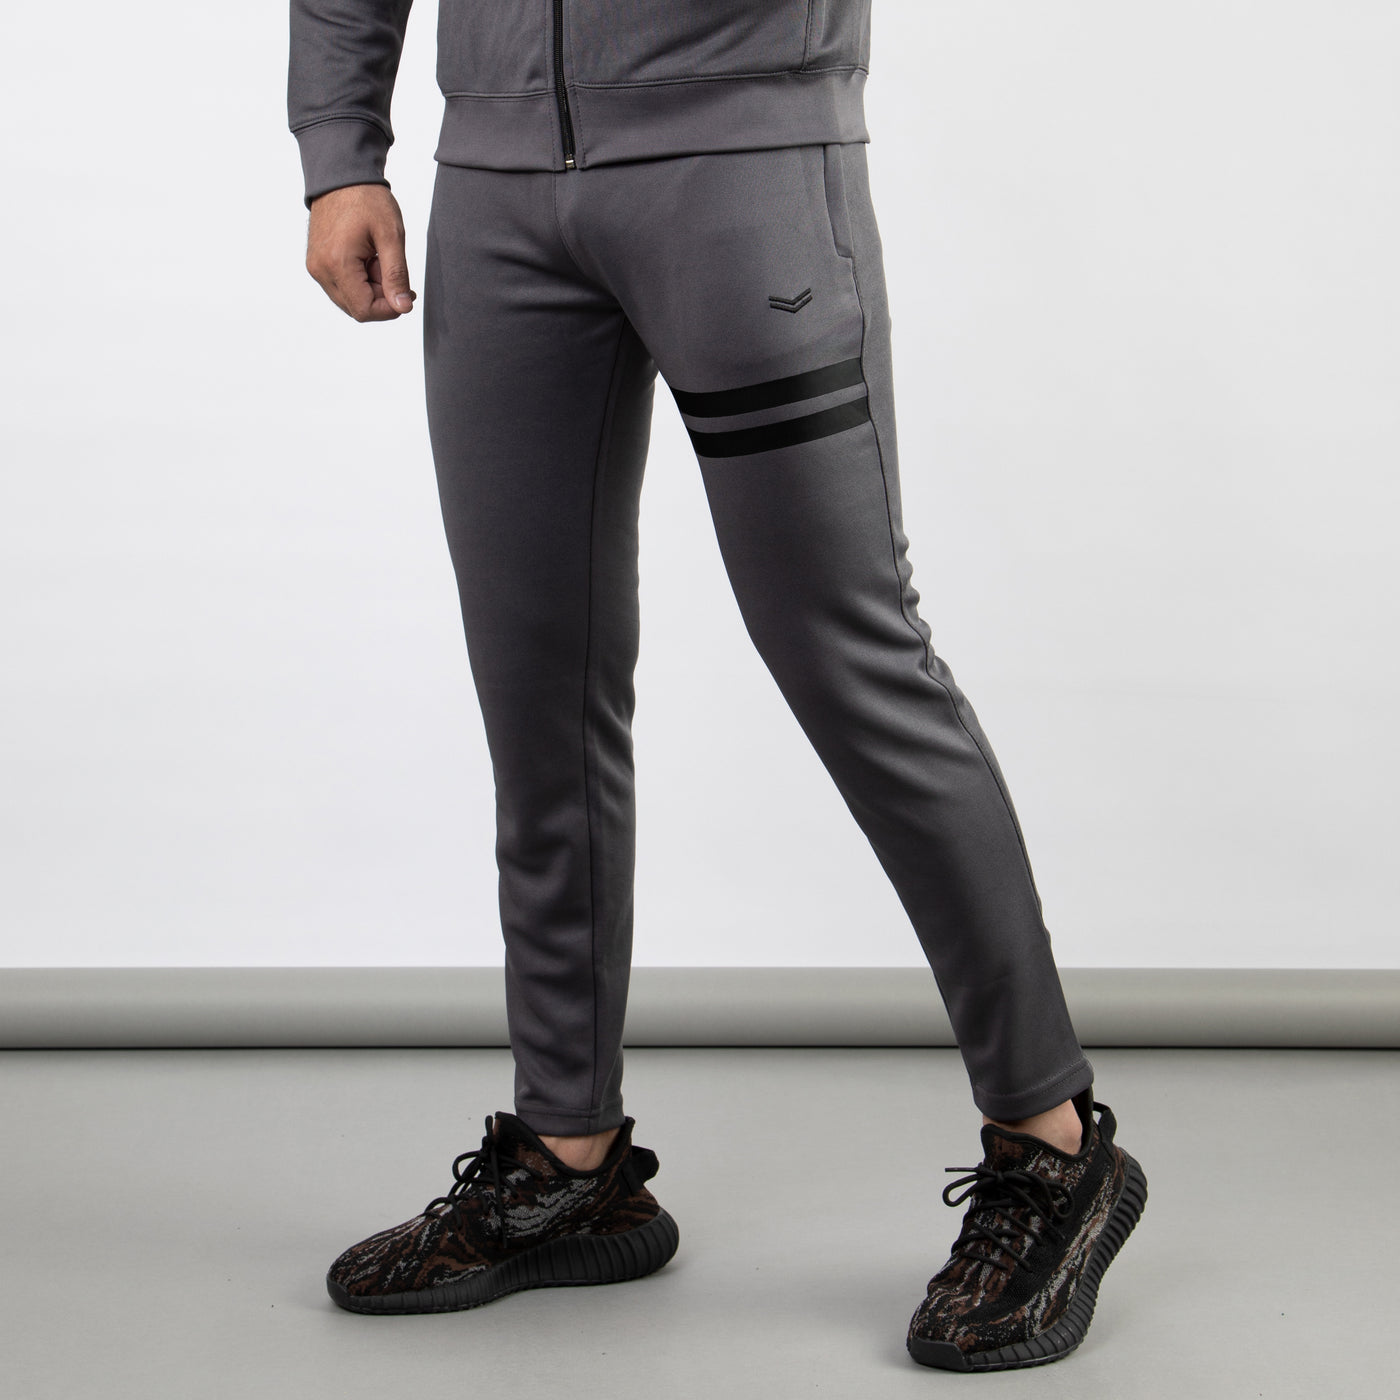 Gray Quick Dry Bottoms with Black Printed Stripes